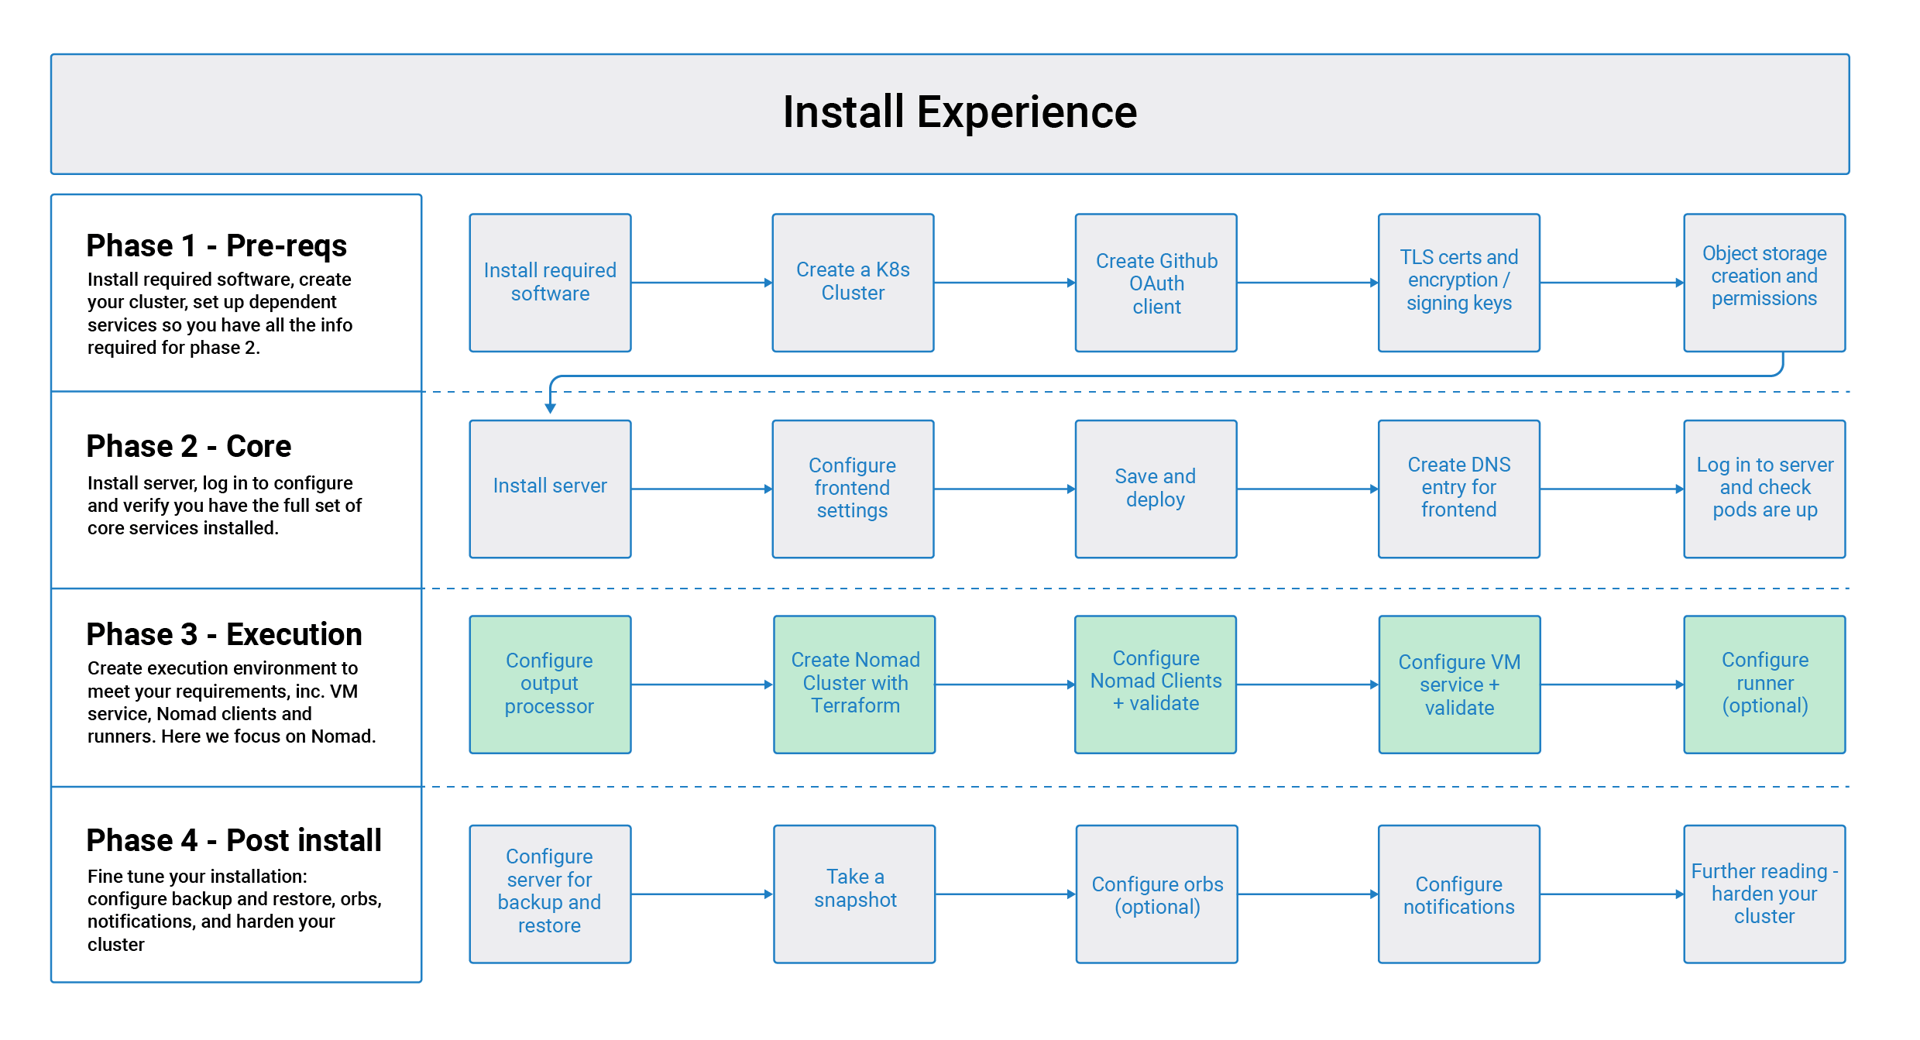 Flow chart showing the installation flow for server 3.x with phase 3 highlighted